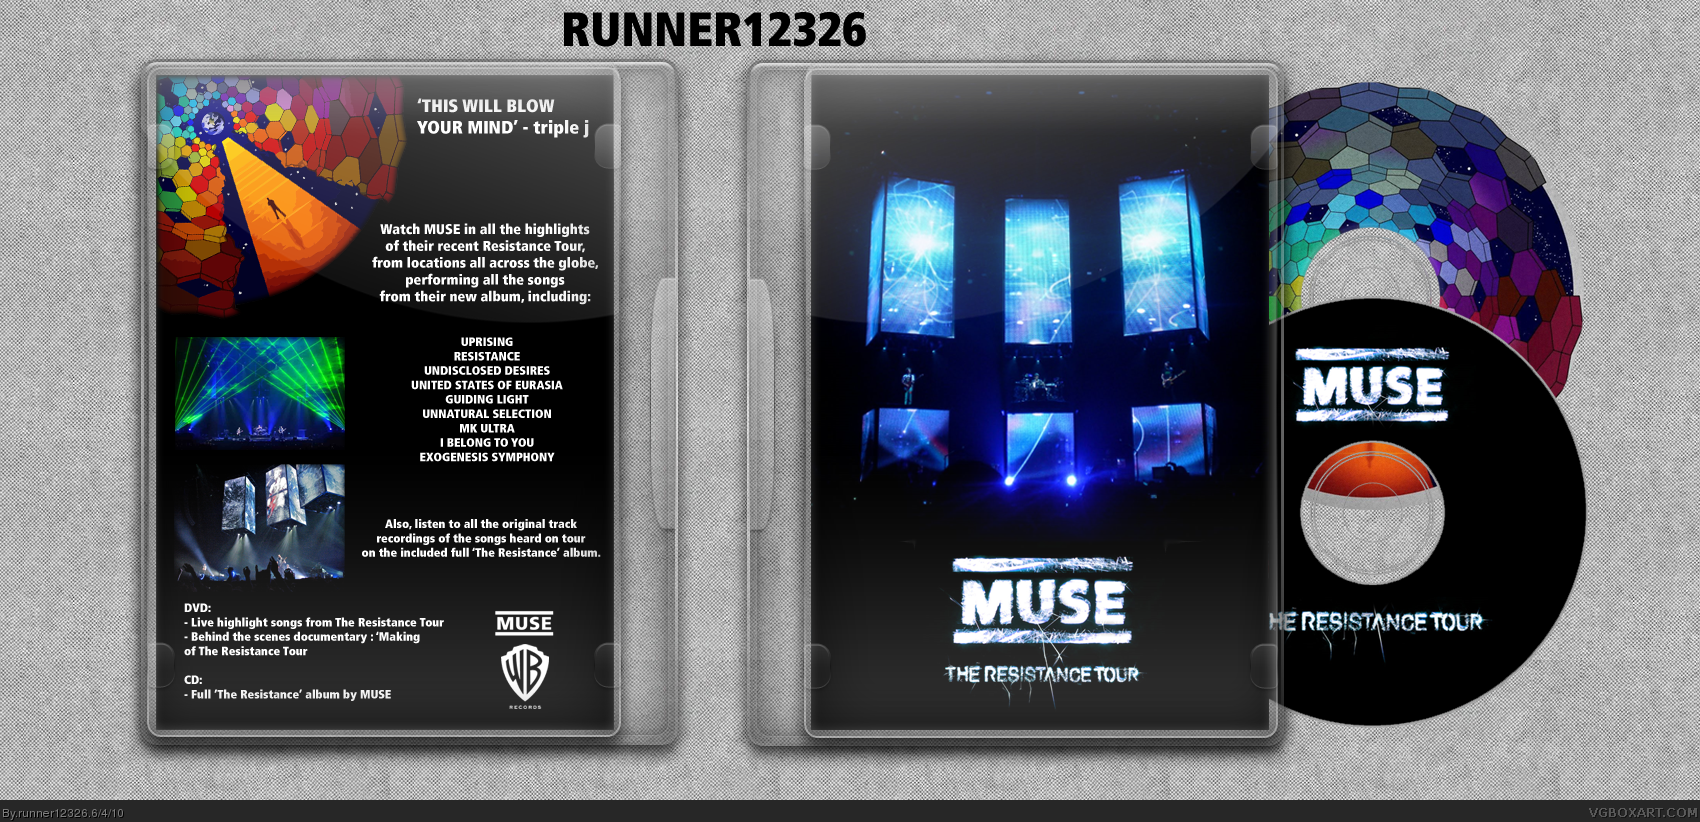 Muse - The Resistance Tour box cover